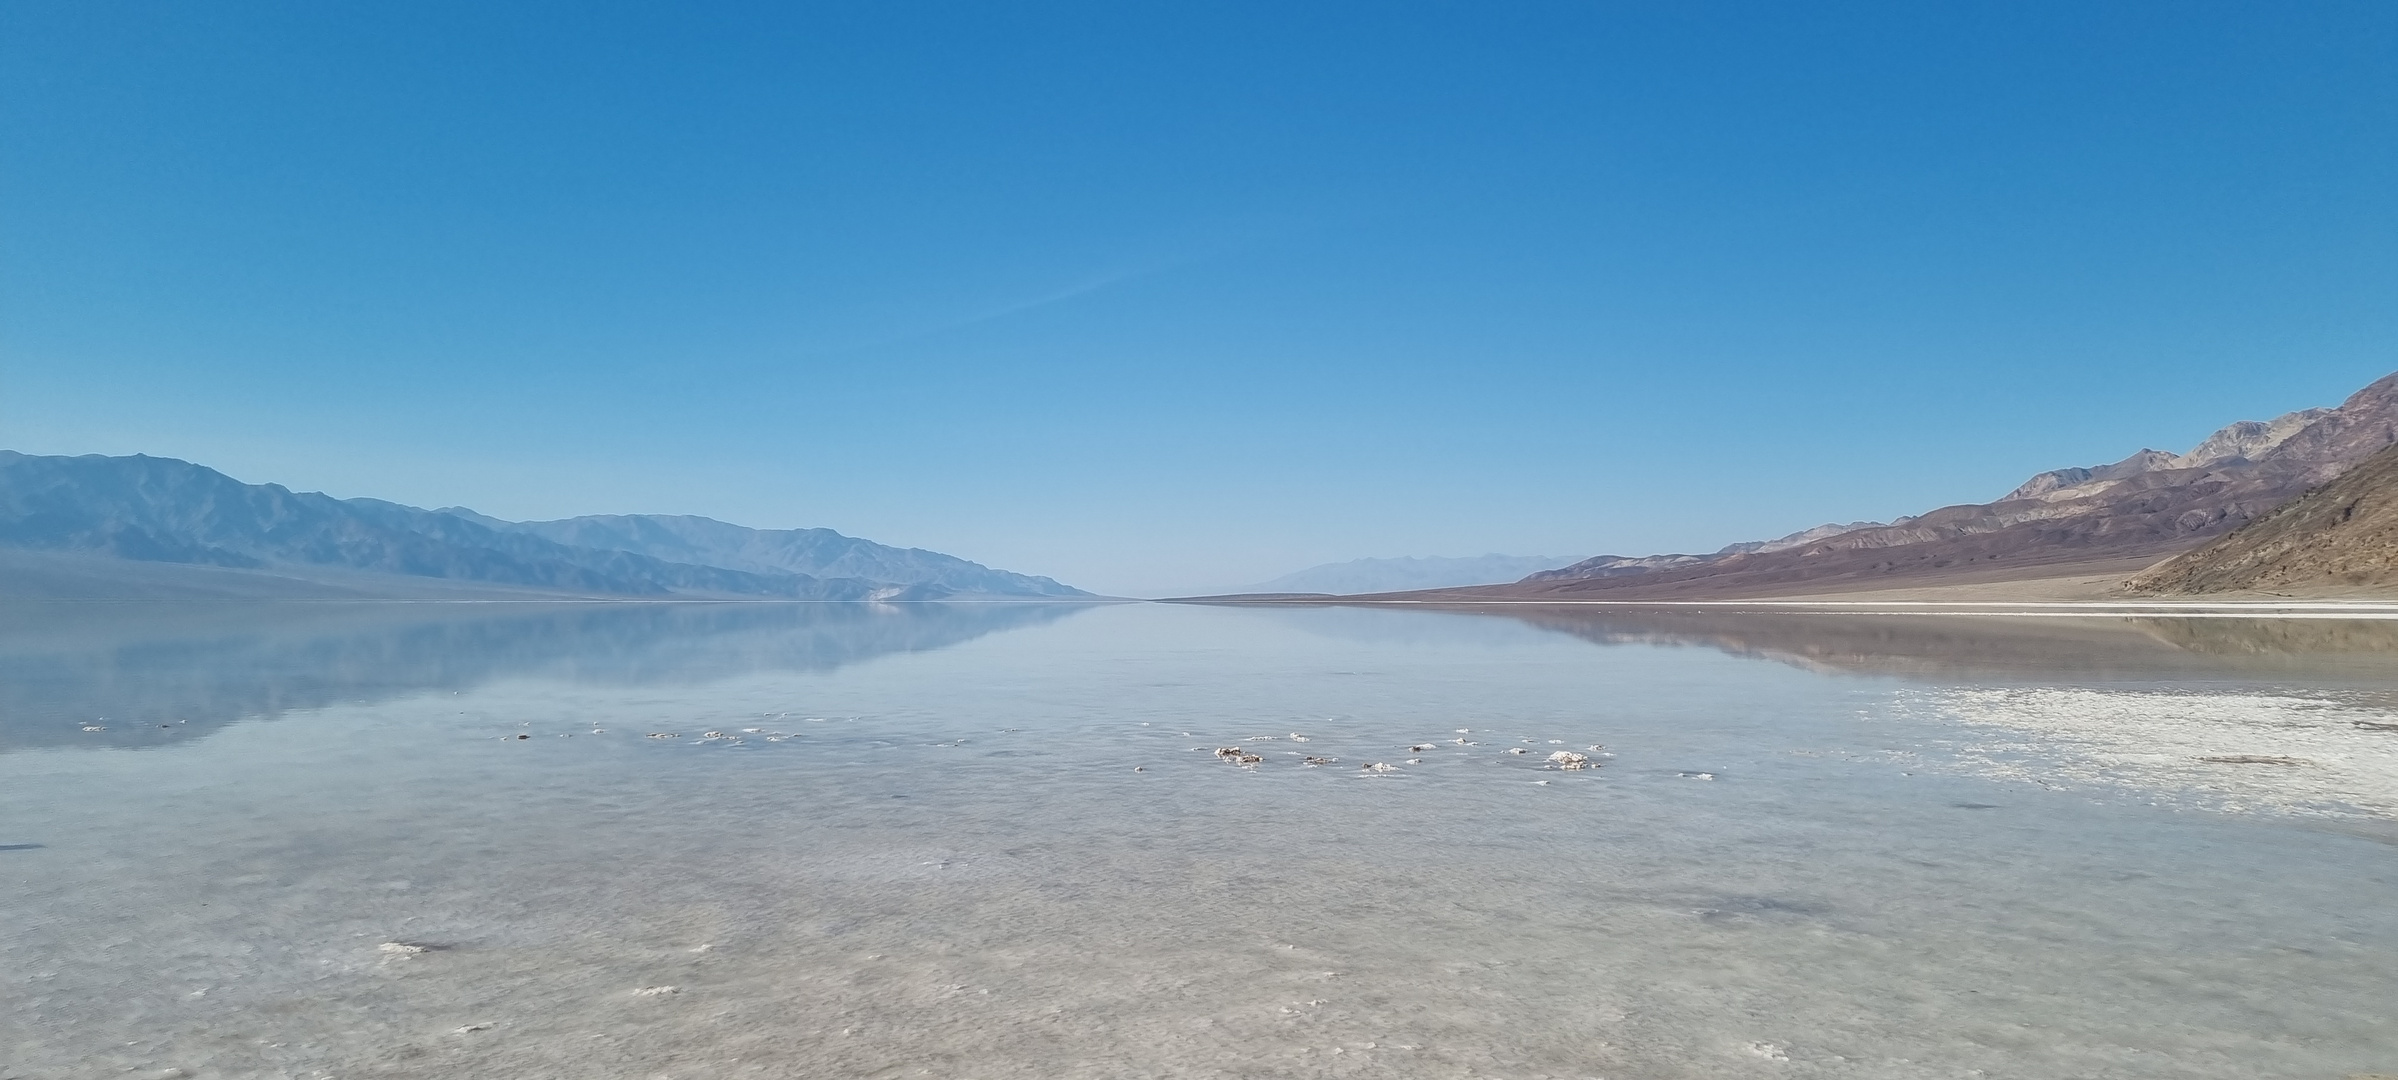 Reflections in the lake at Badwater Basin / Death Valley